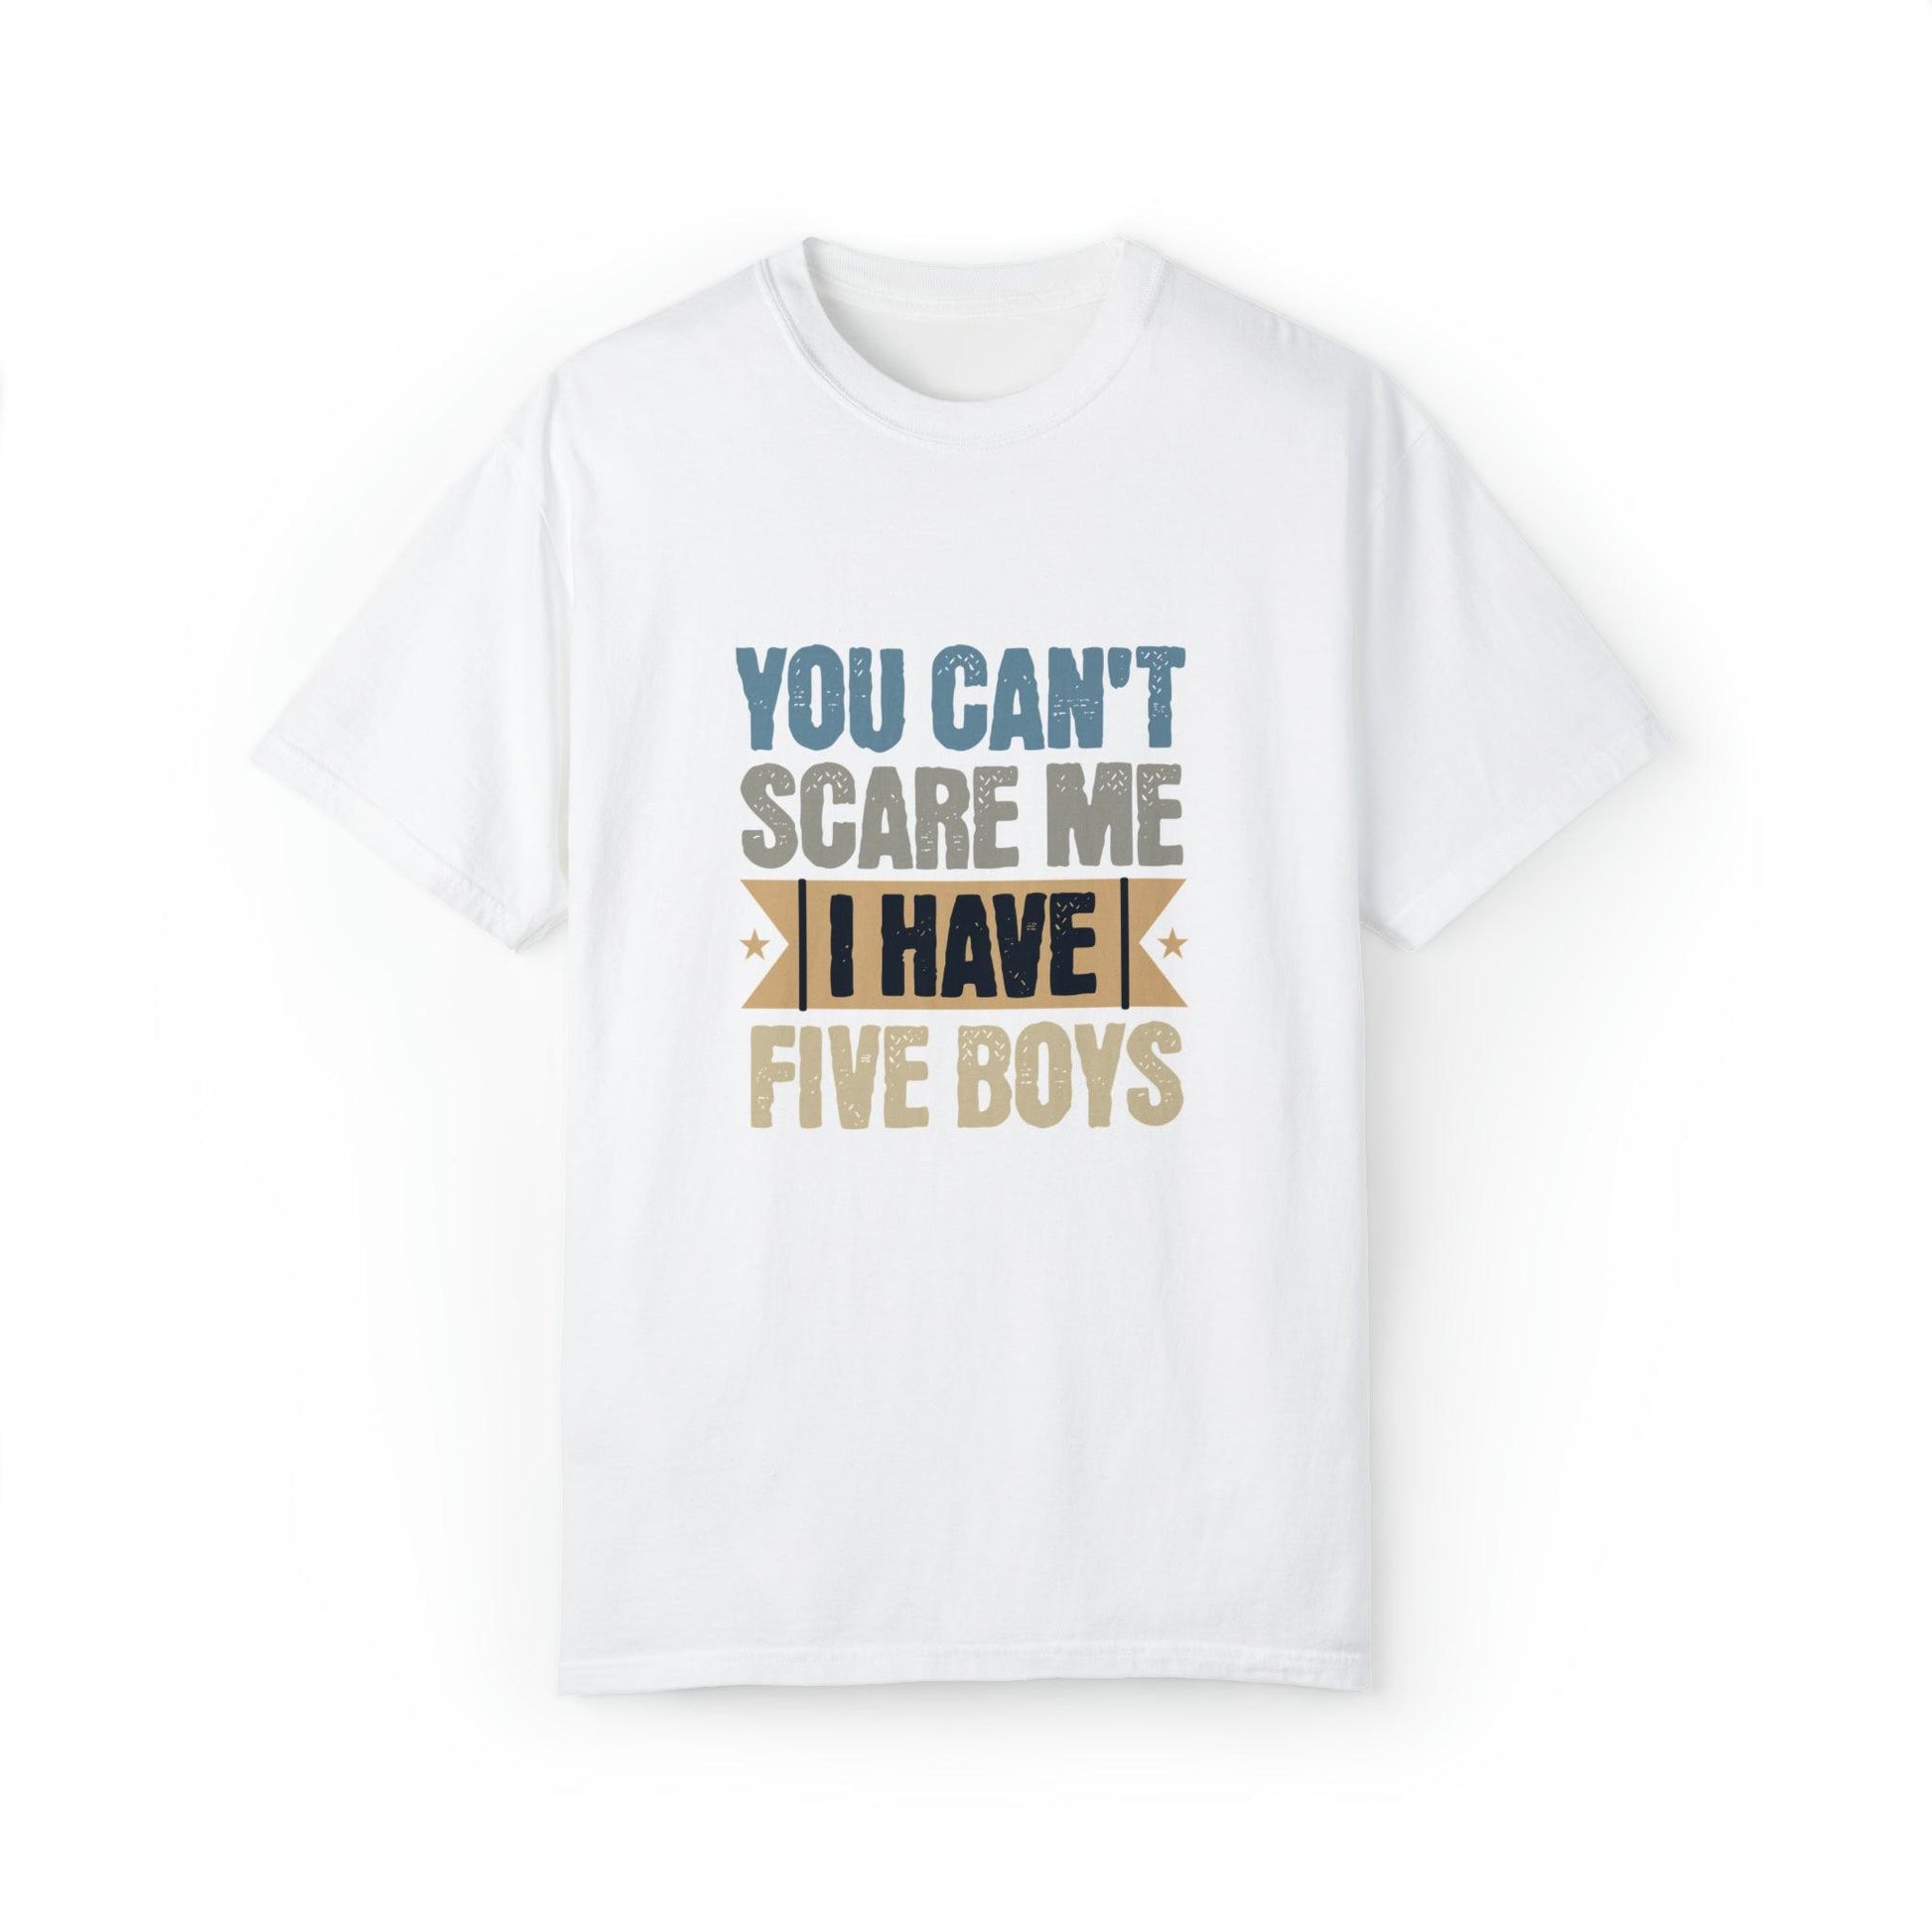 You Can't Scare Me, I Have 5 Boys: Proud Mama T-Shirt - Pandaize